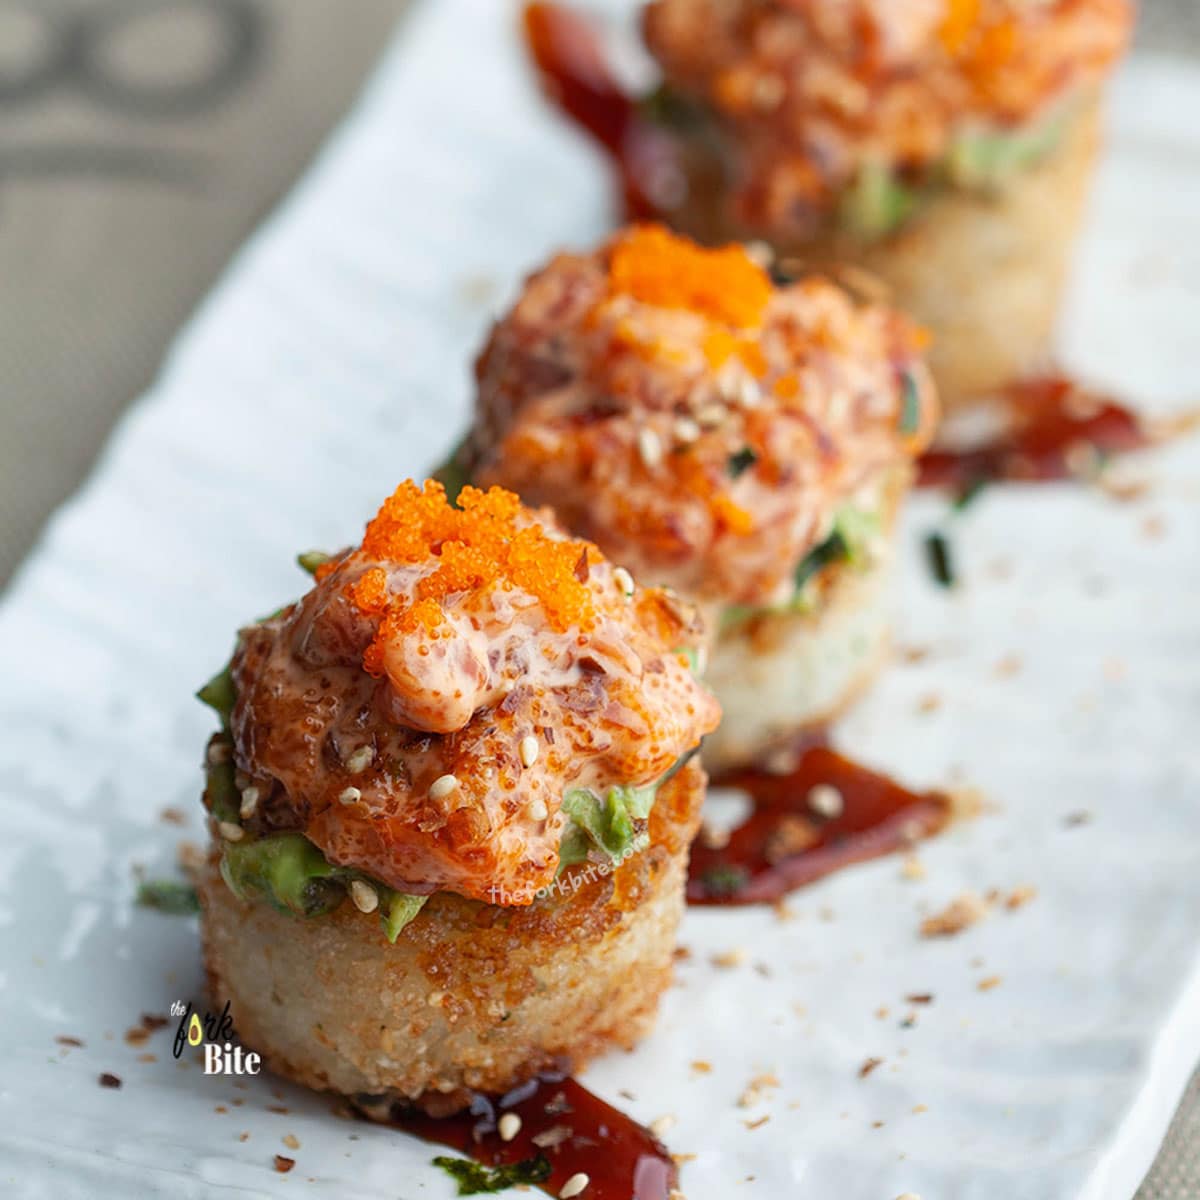 You're going to love this Crispy Rice Spicy Tuna Tartare Poppers. Once you sample the delights of these deliciously spiced party pieces, you will want to serve them at your next dinner party or soirée.